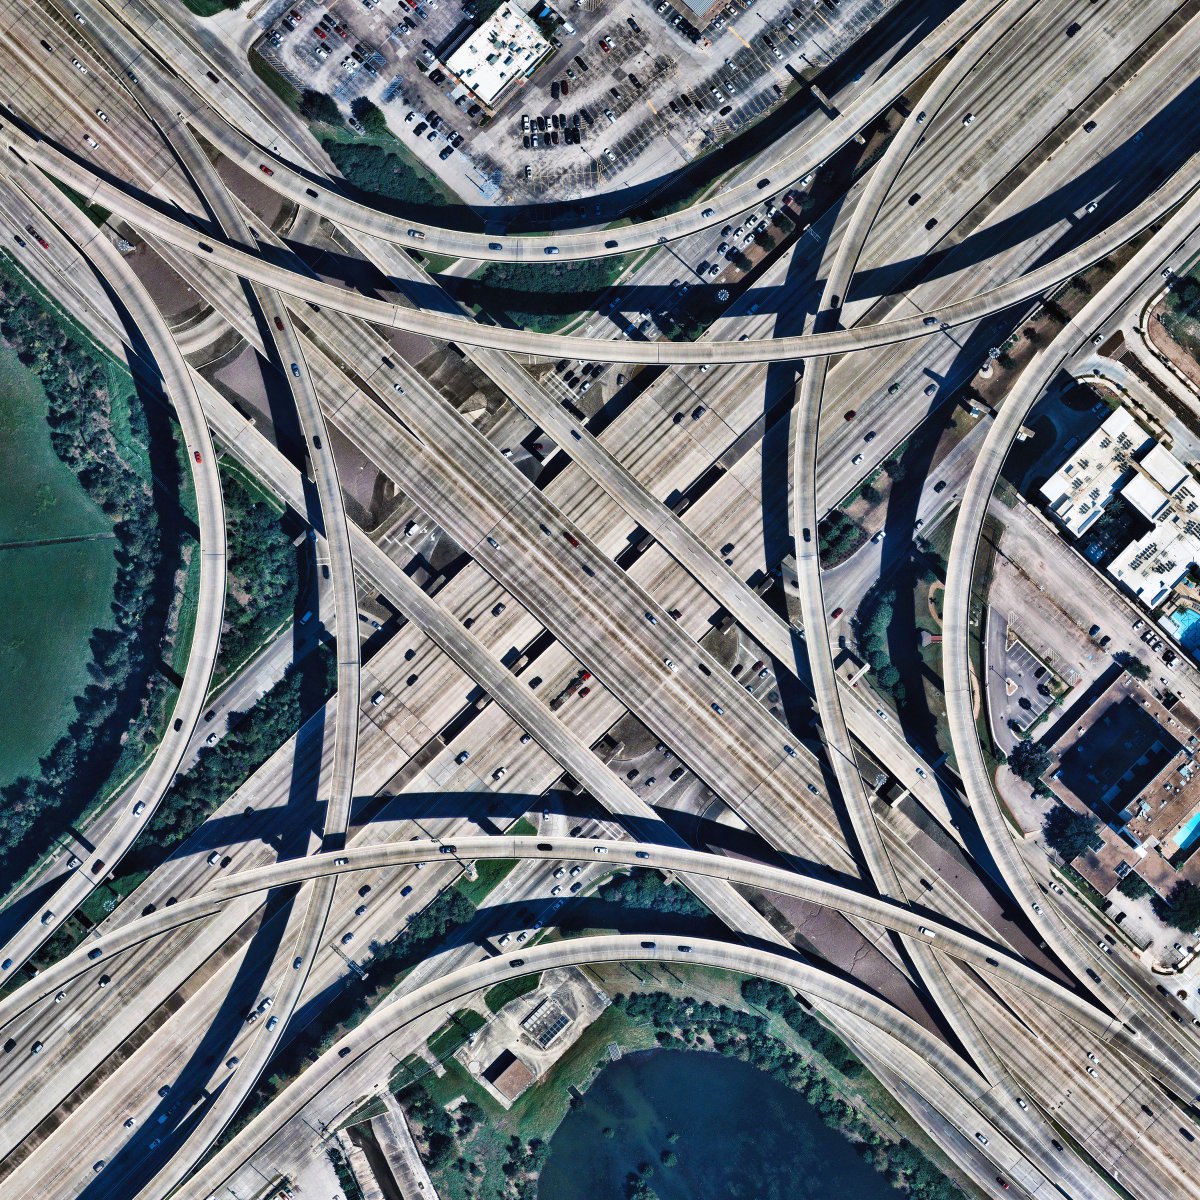 A stack interchange forms at the intersection of Beltway 8 and Interstate 10 in Memorial City, Texas. See more here: bit.ly/2Ut4sbk /// #dailyoverview #aerialphotography #picoftheday #earth #stackinterchange #MemorialCity #Houston #Texas #urban #traffic